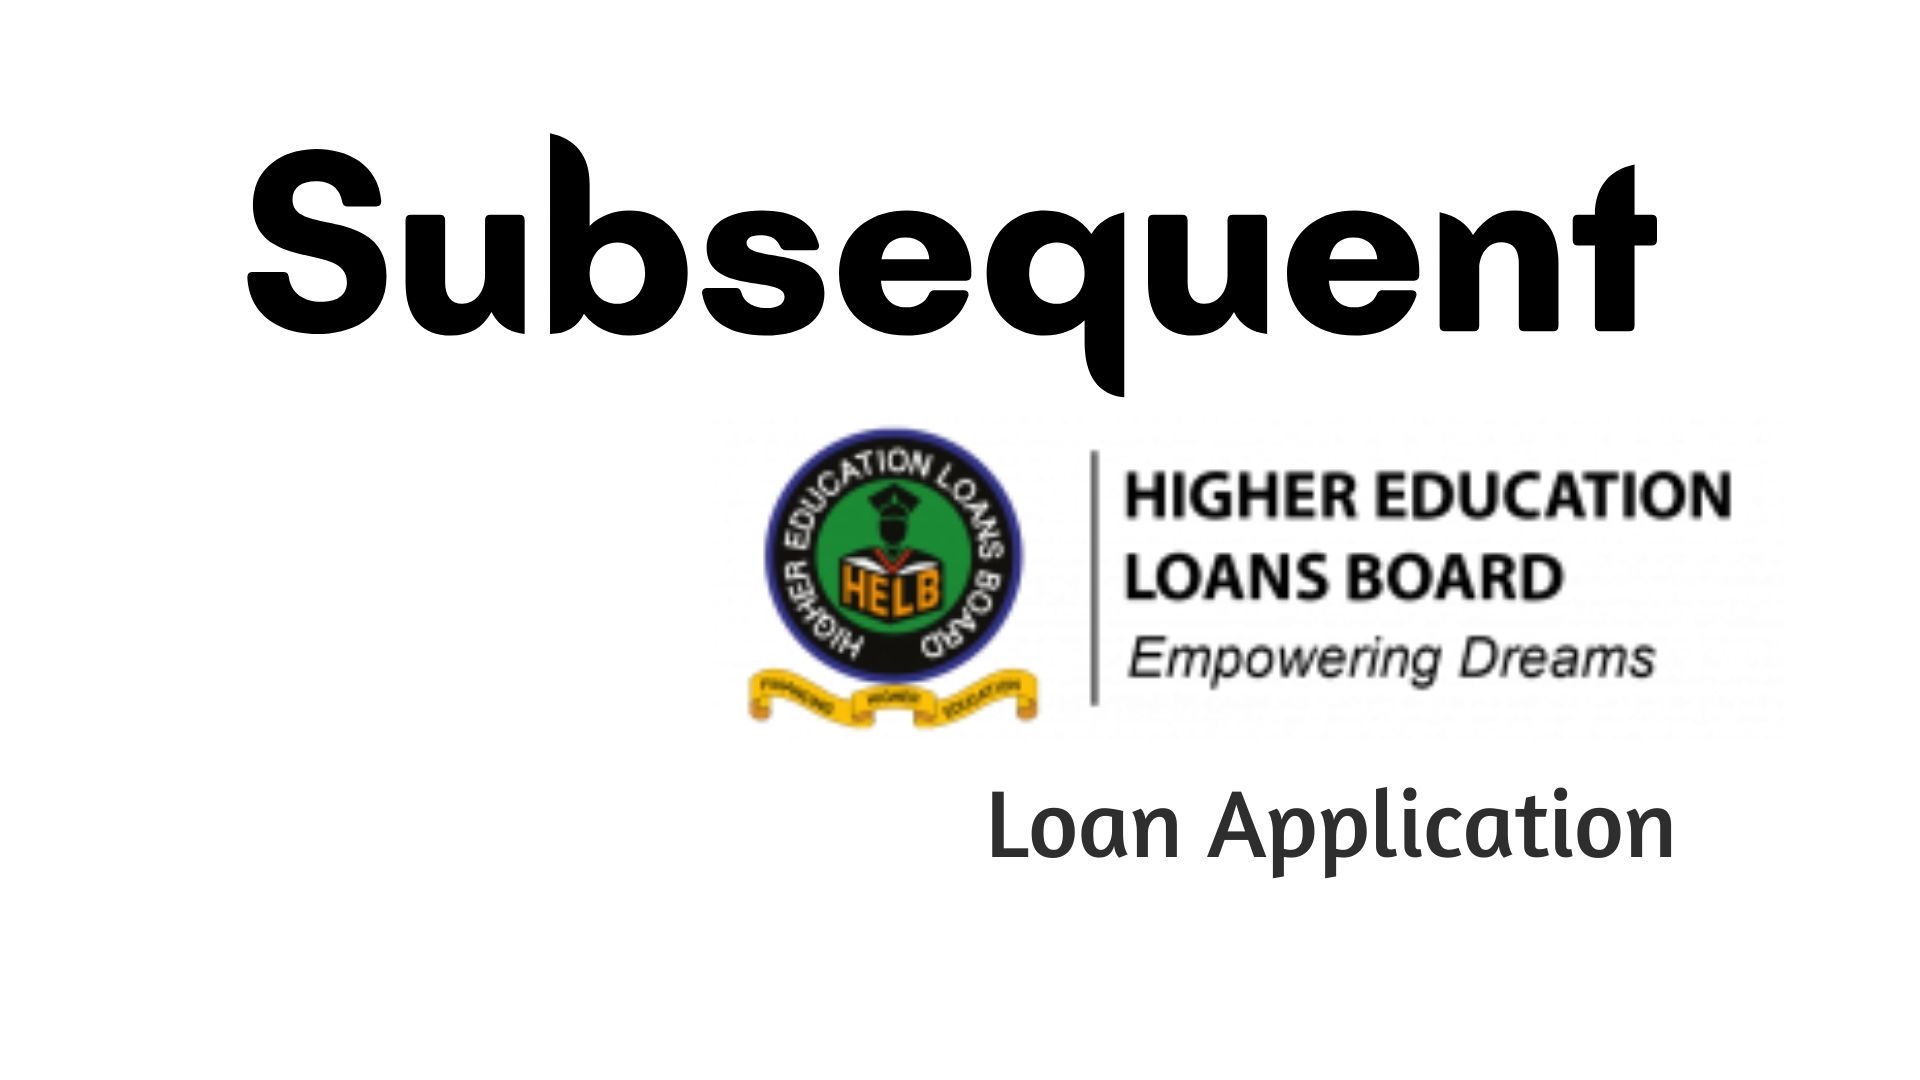 How to apply for Subsequent HELB Loan via app or 642